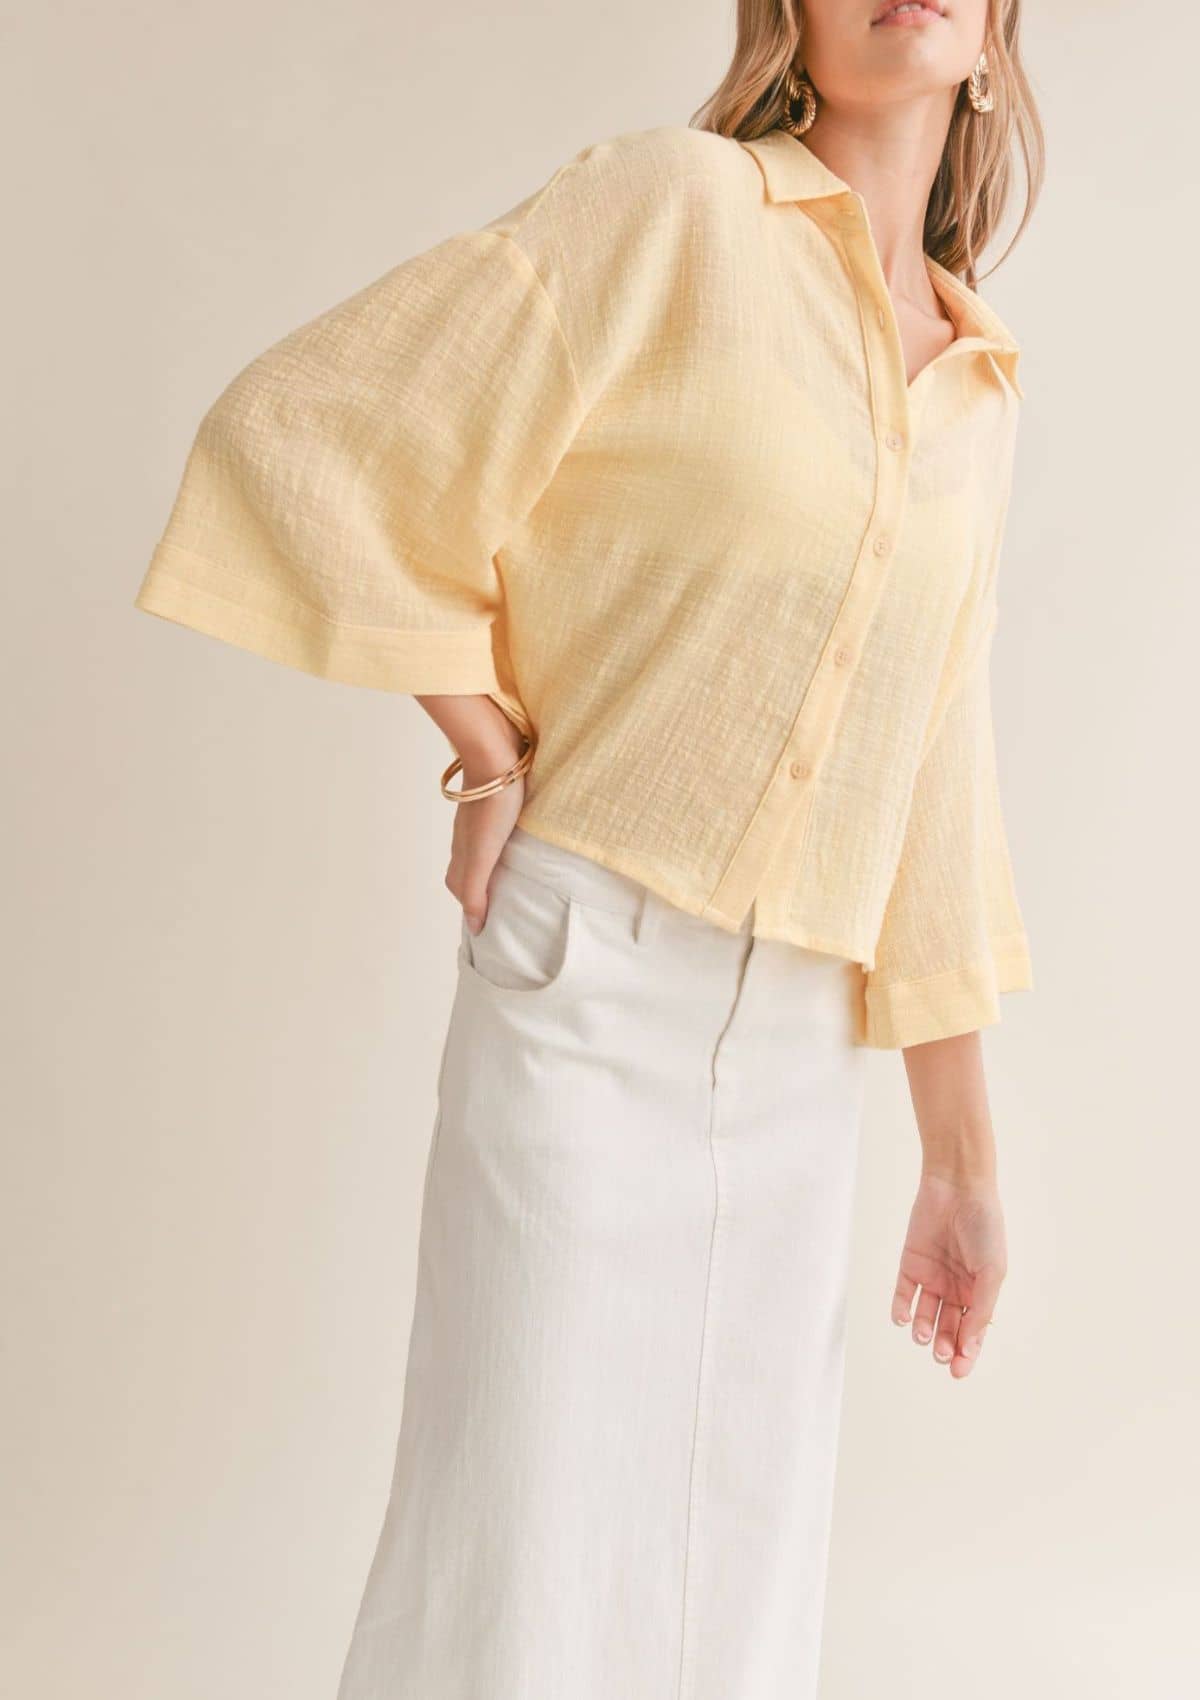 Buttondown Shirts-Casual Tops-clothing-Ruby Jane.